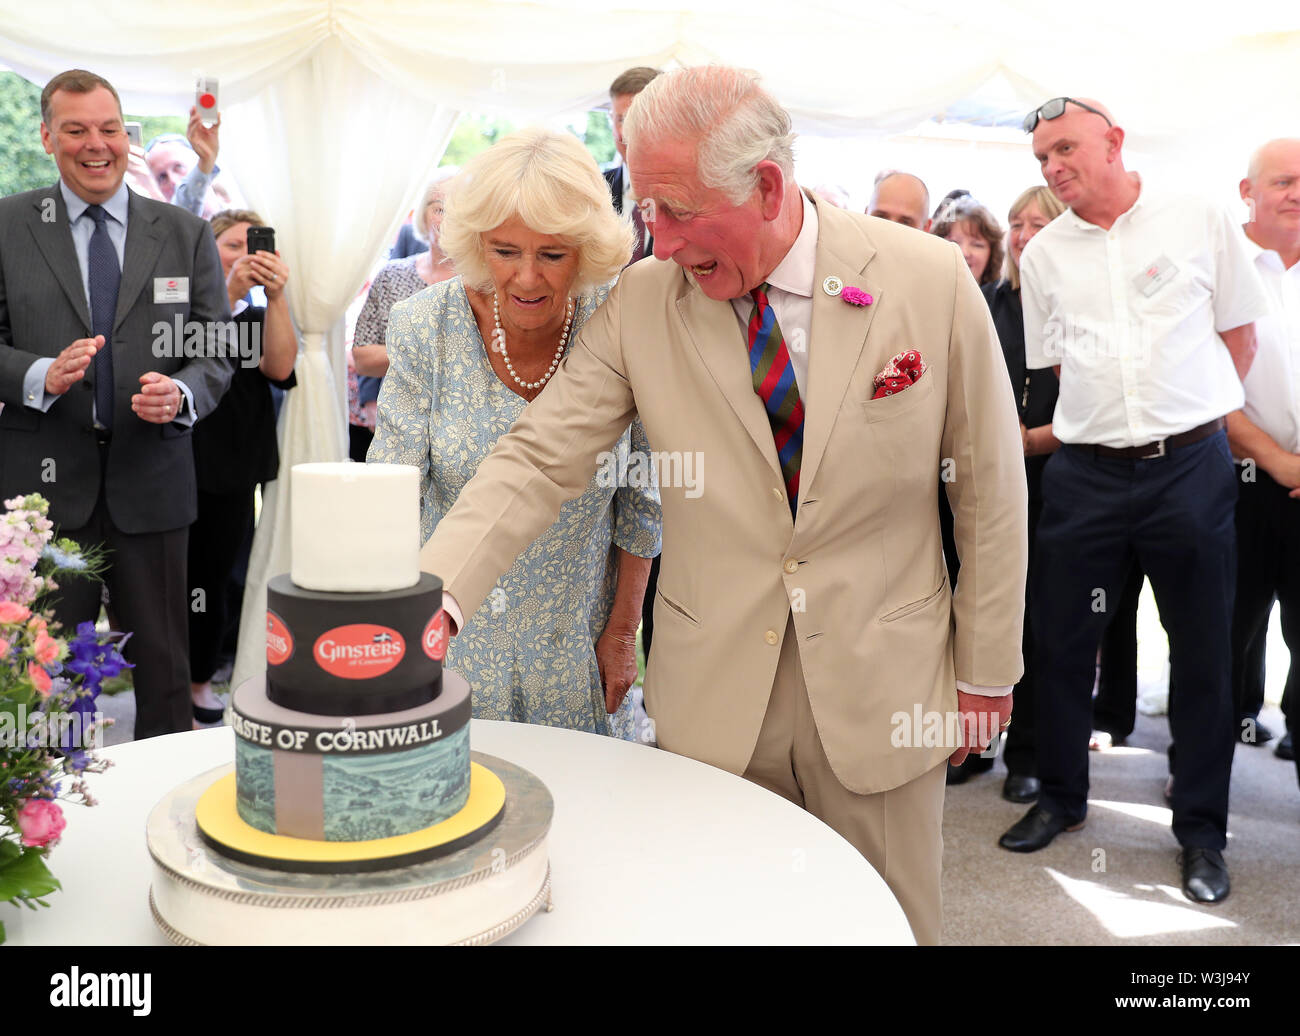 The Prince of Wales and the Duchess of Cornwall cut a cake during a garden party to celebrate the 50th anniversary of Ginsters bakery in Callington, as part of their visit to Cornwall. Stock Photo